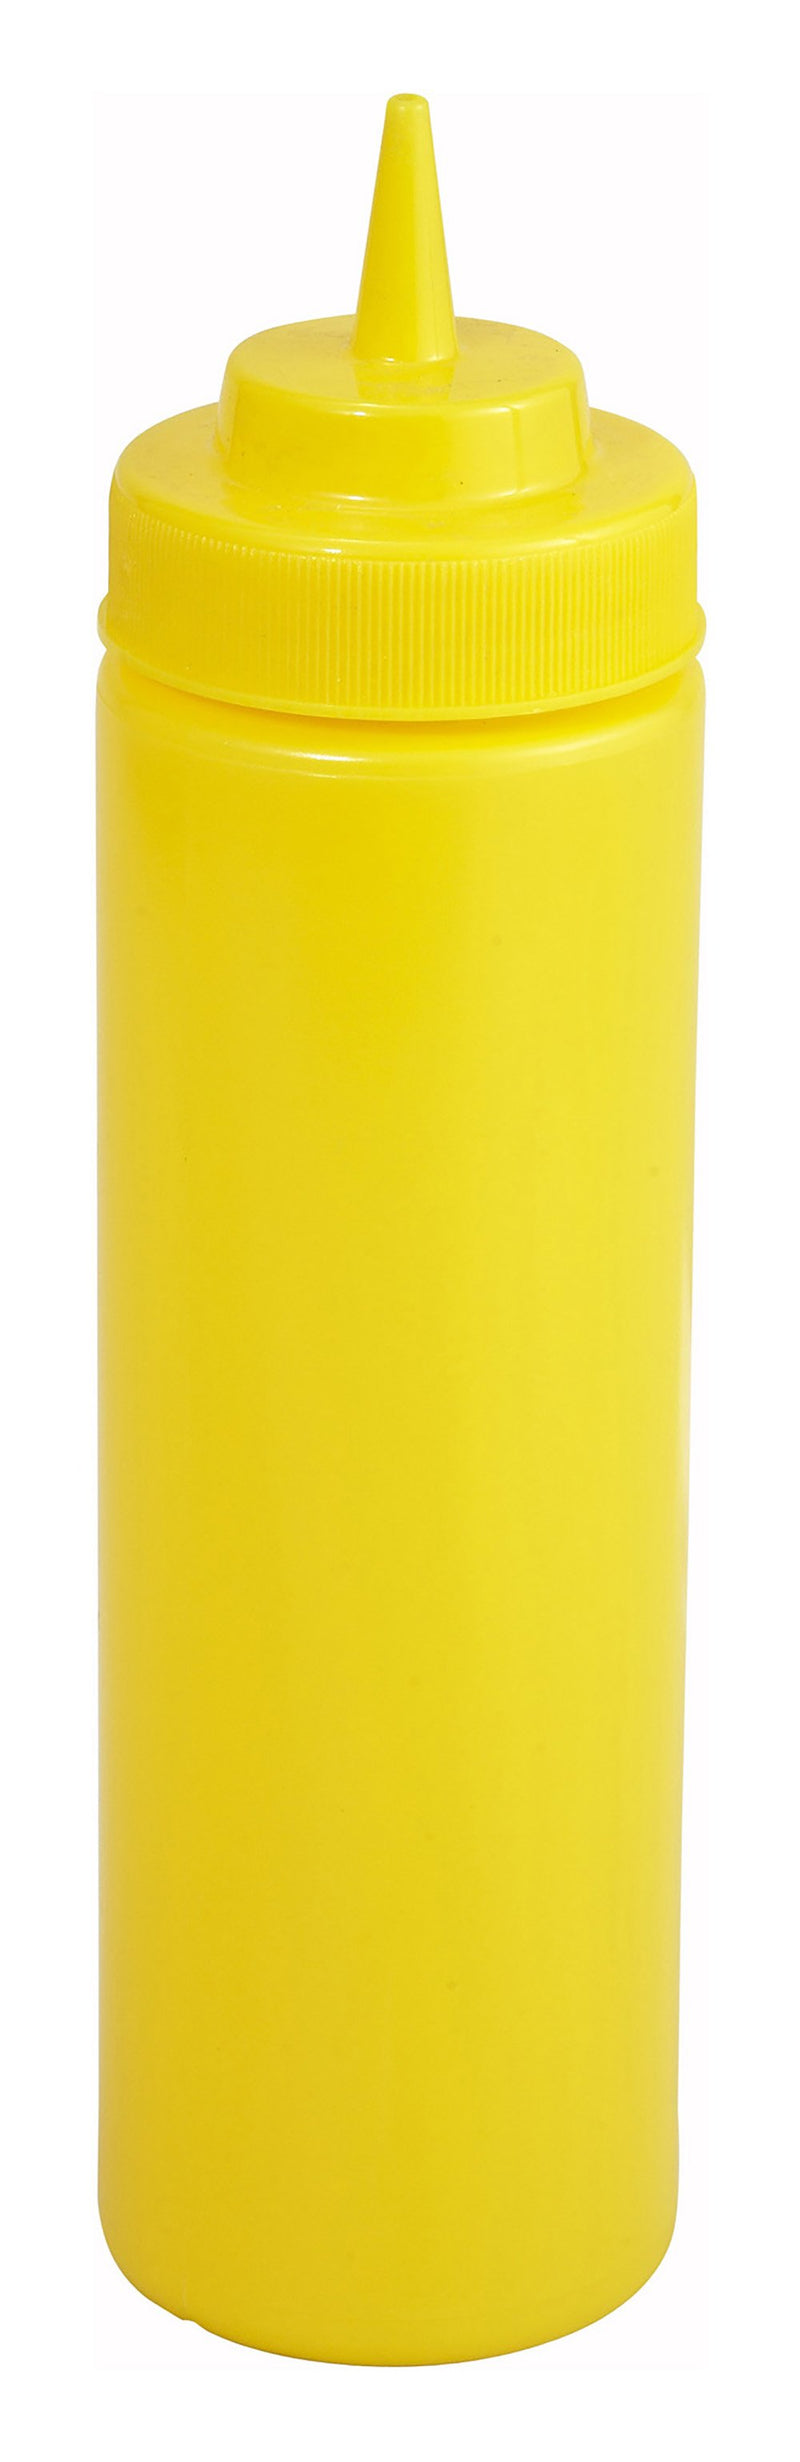 16oz Wide Mouth Squeeze Bottle